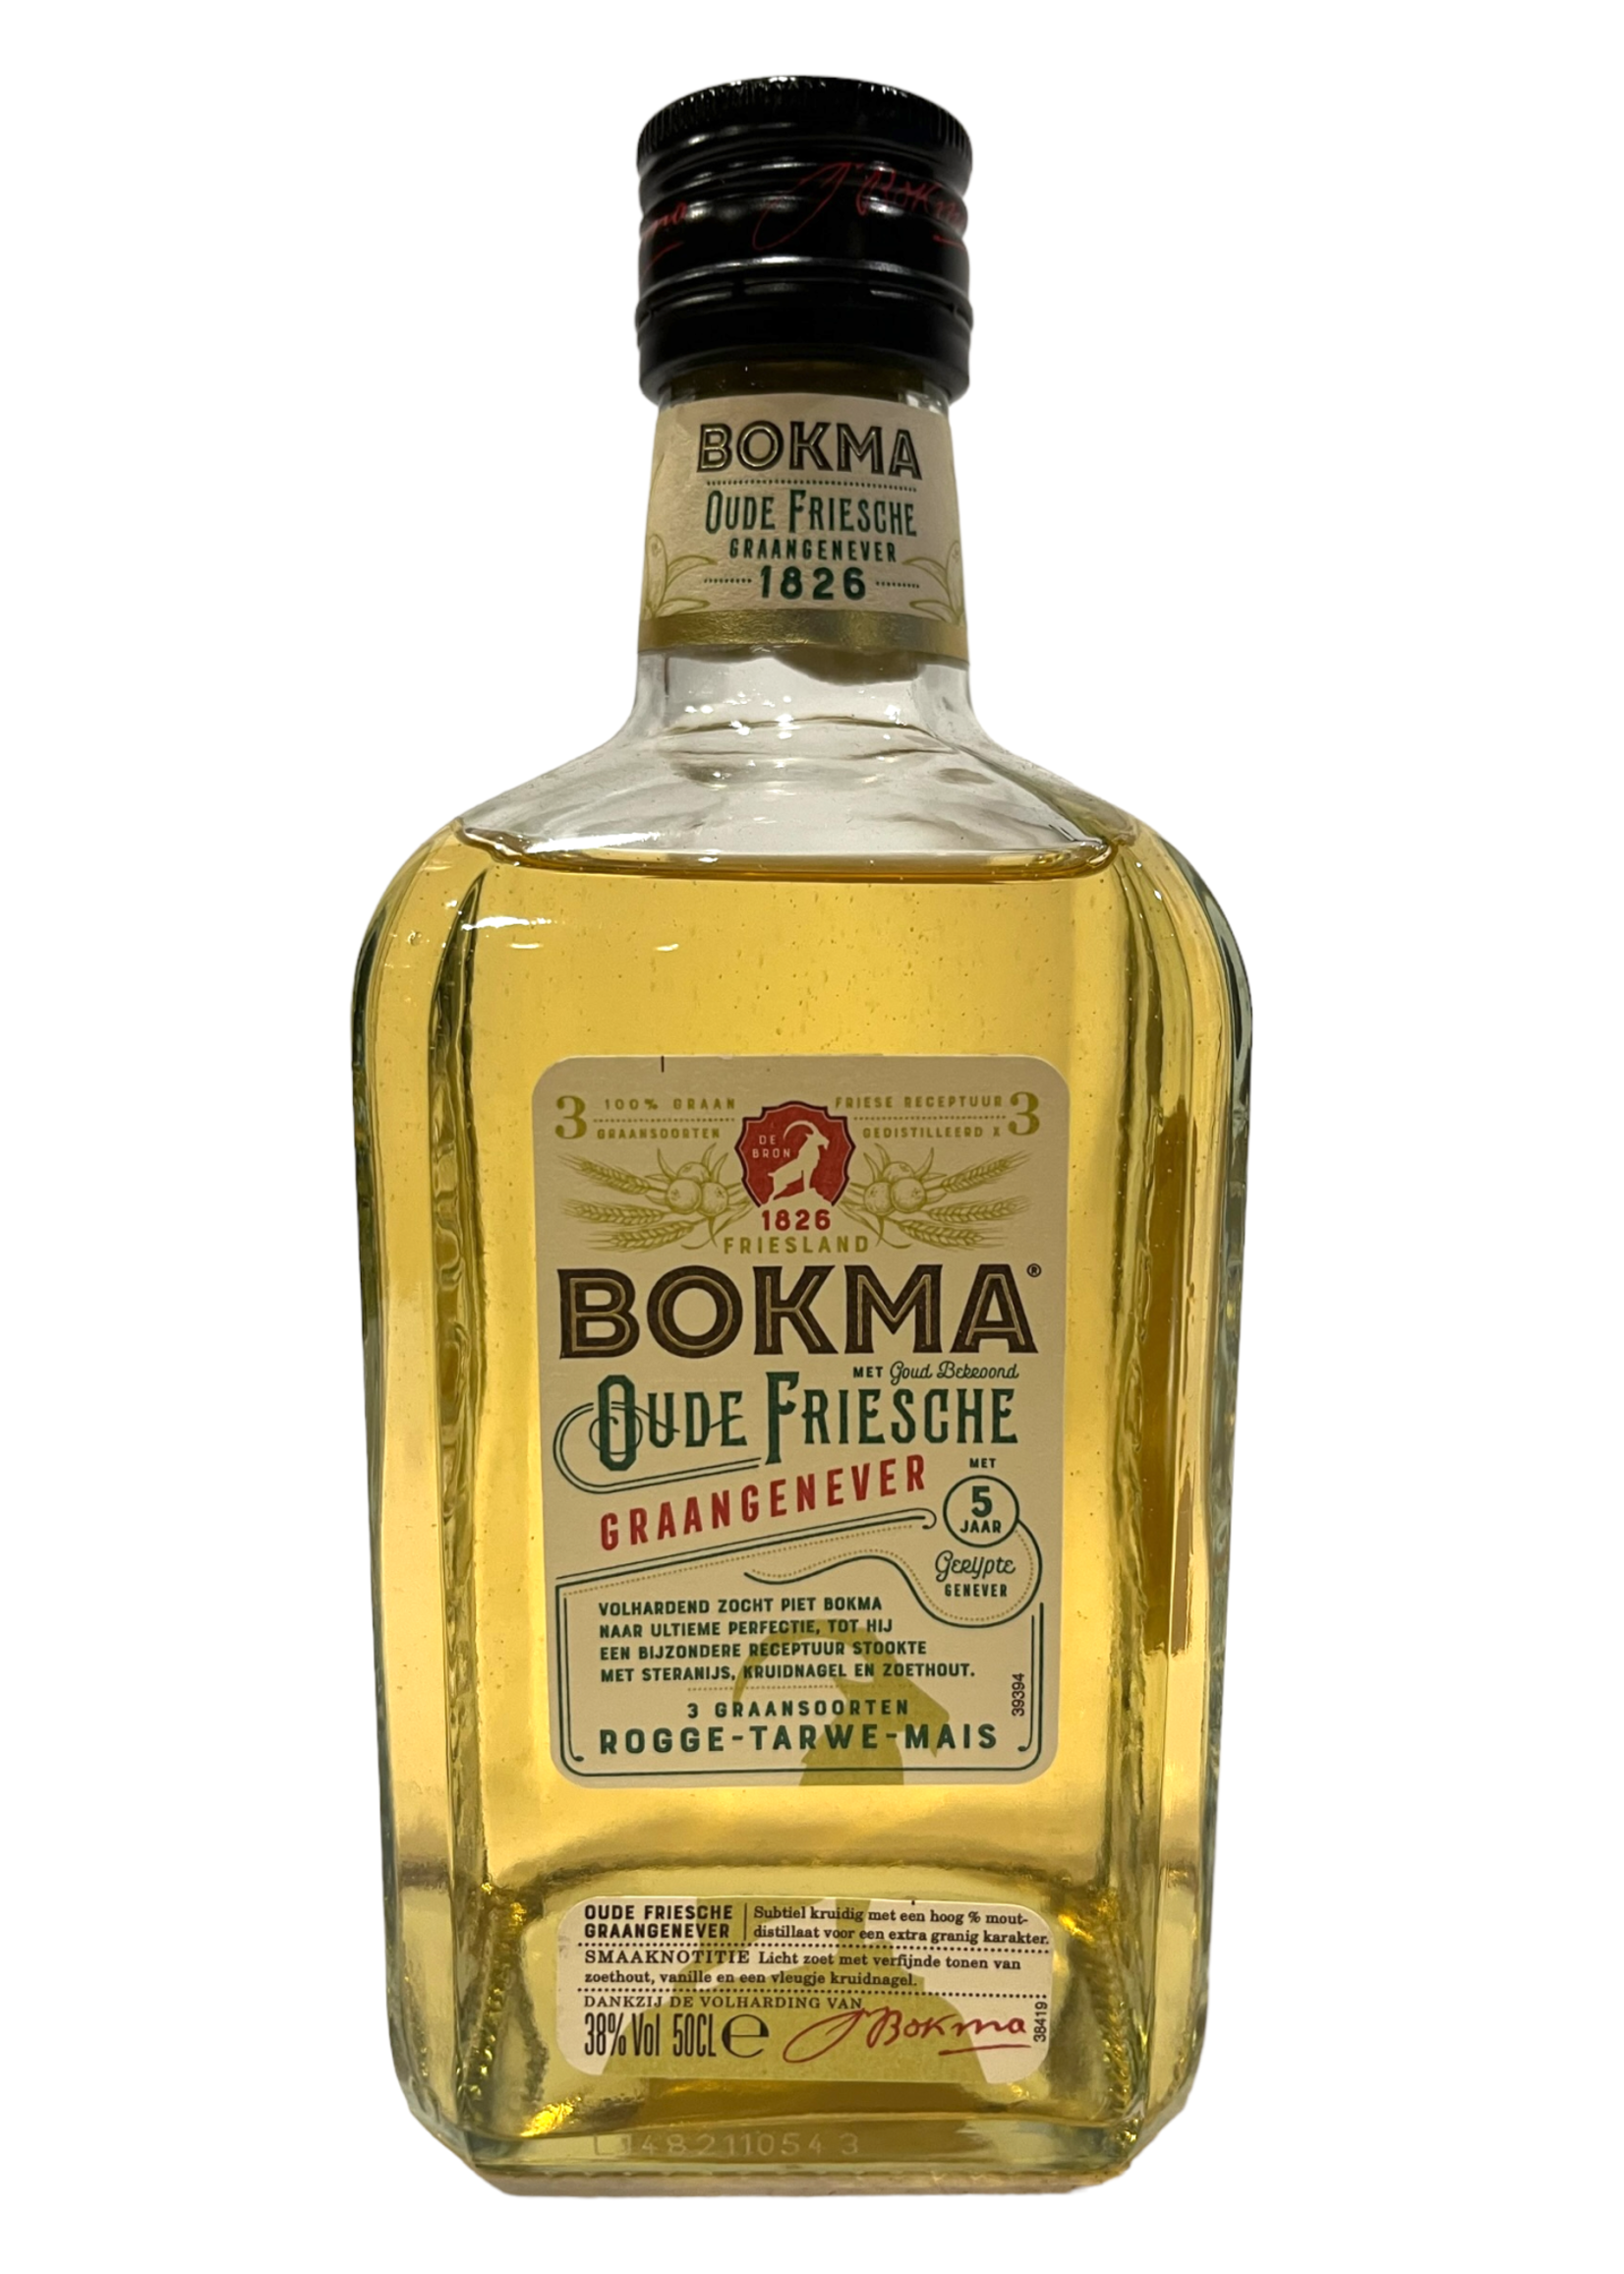 Bokma Oude Genever 0.5L